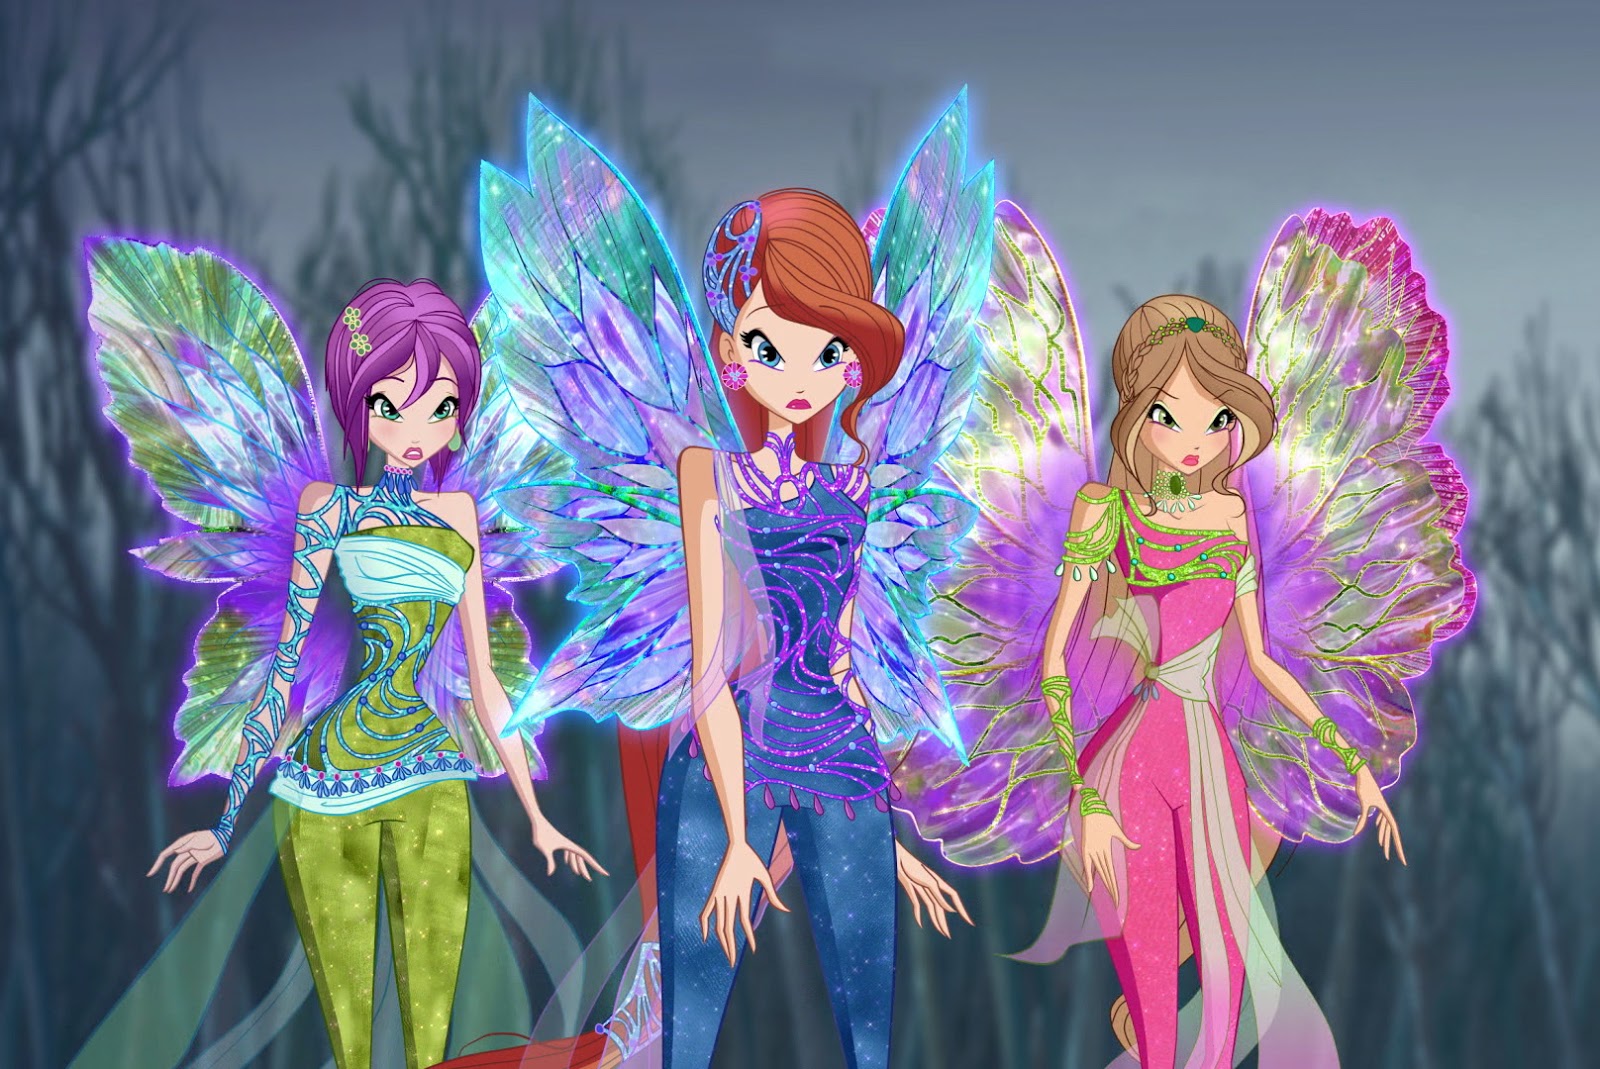 New World of Winx images + Dreamix! - Winx Club All